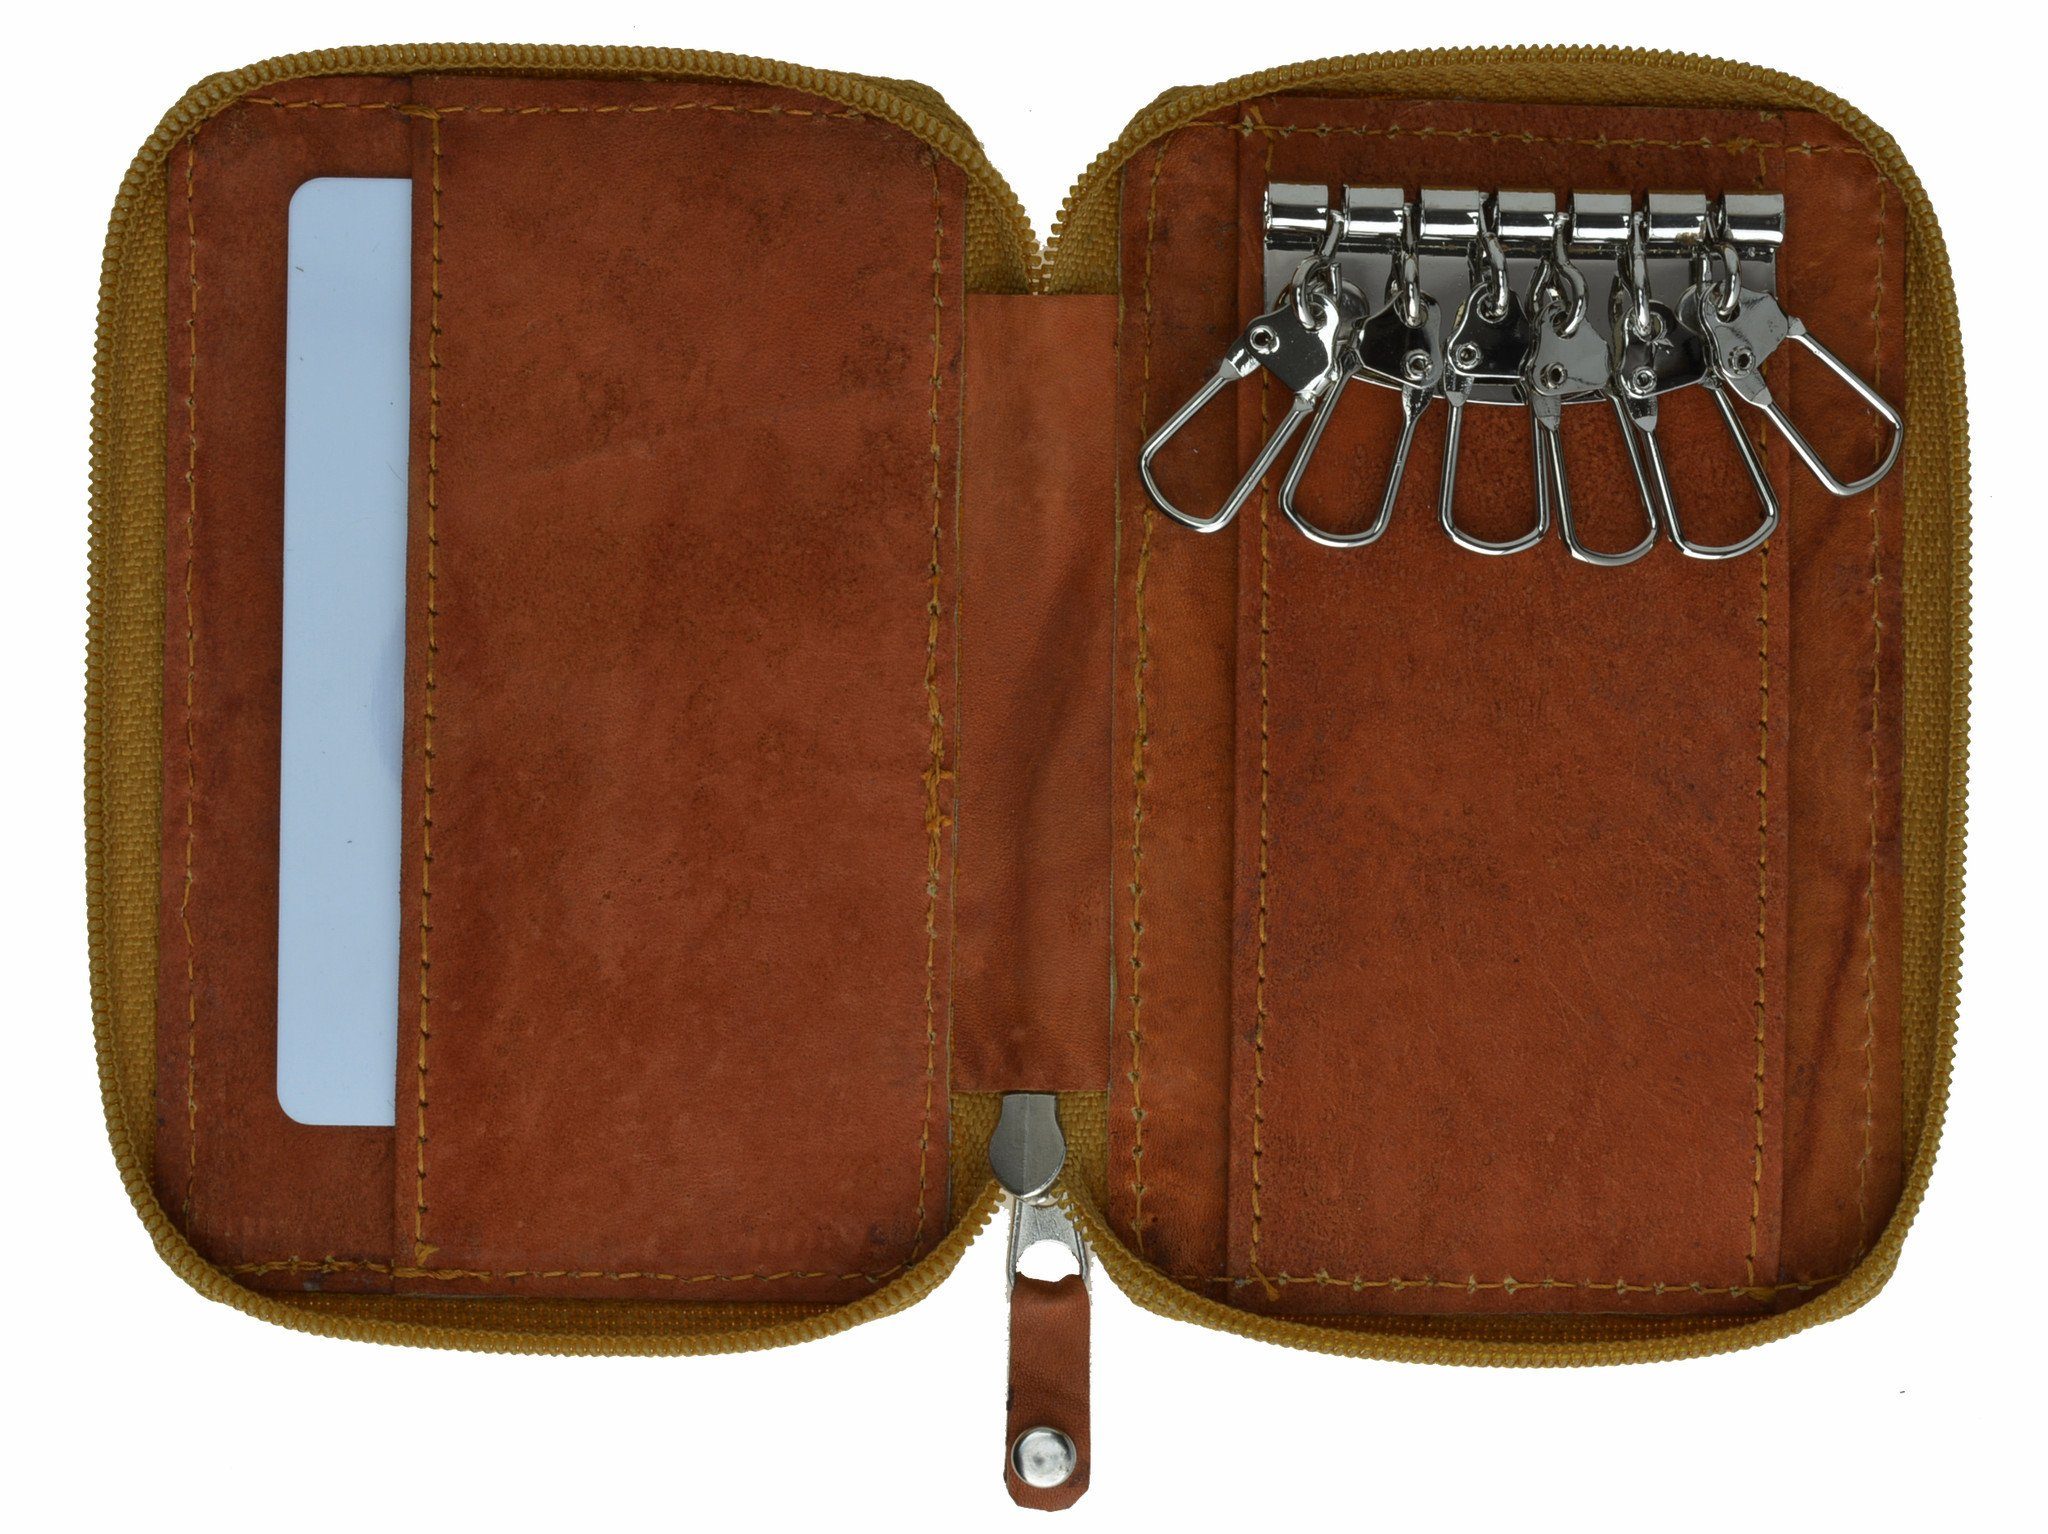 Genuine Leather Classic Key Holder Wallet